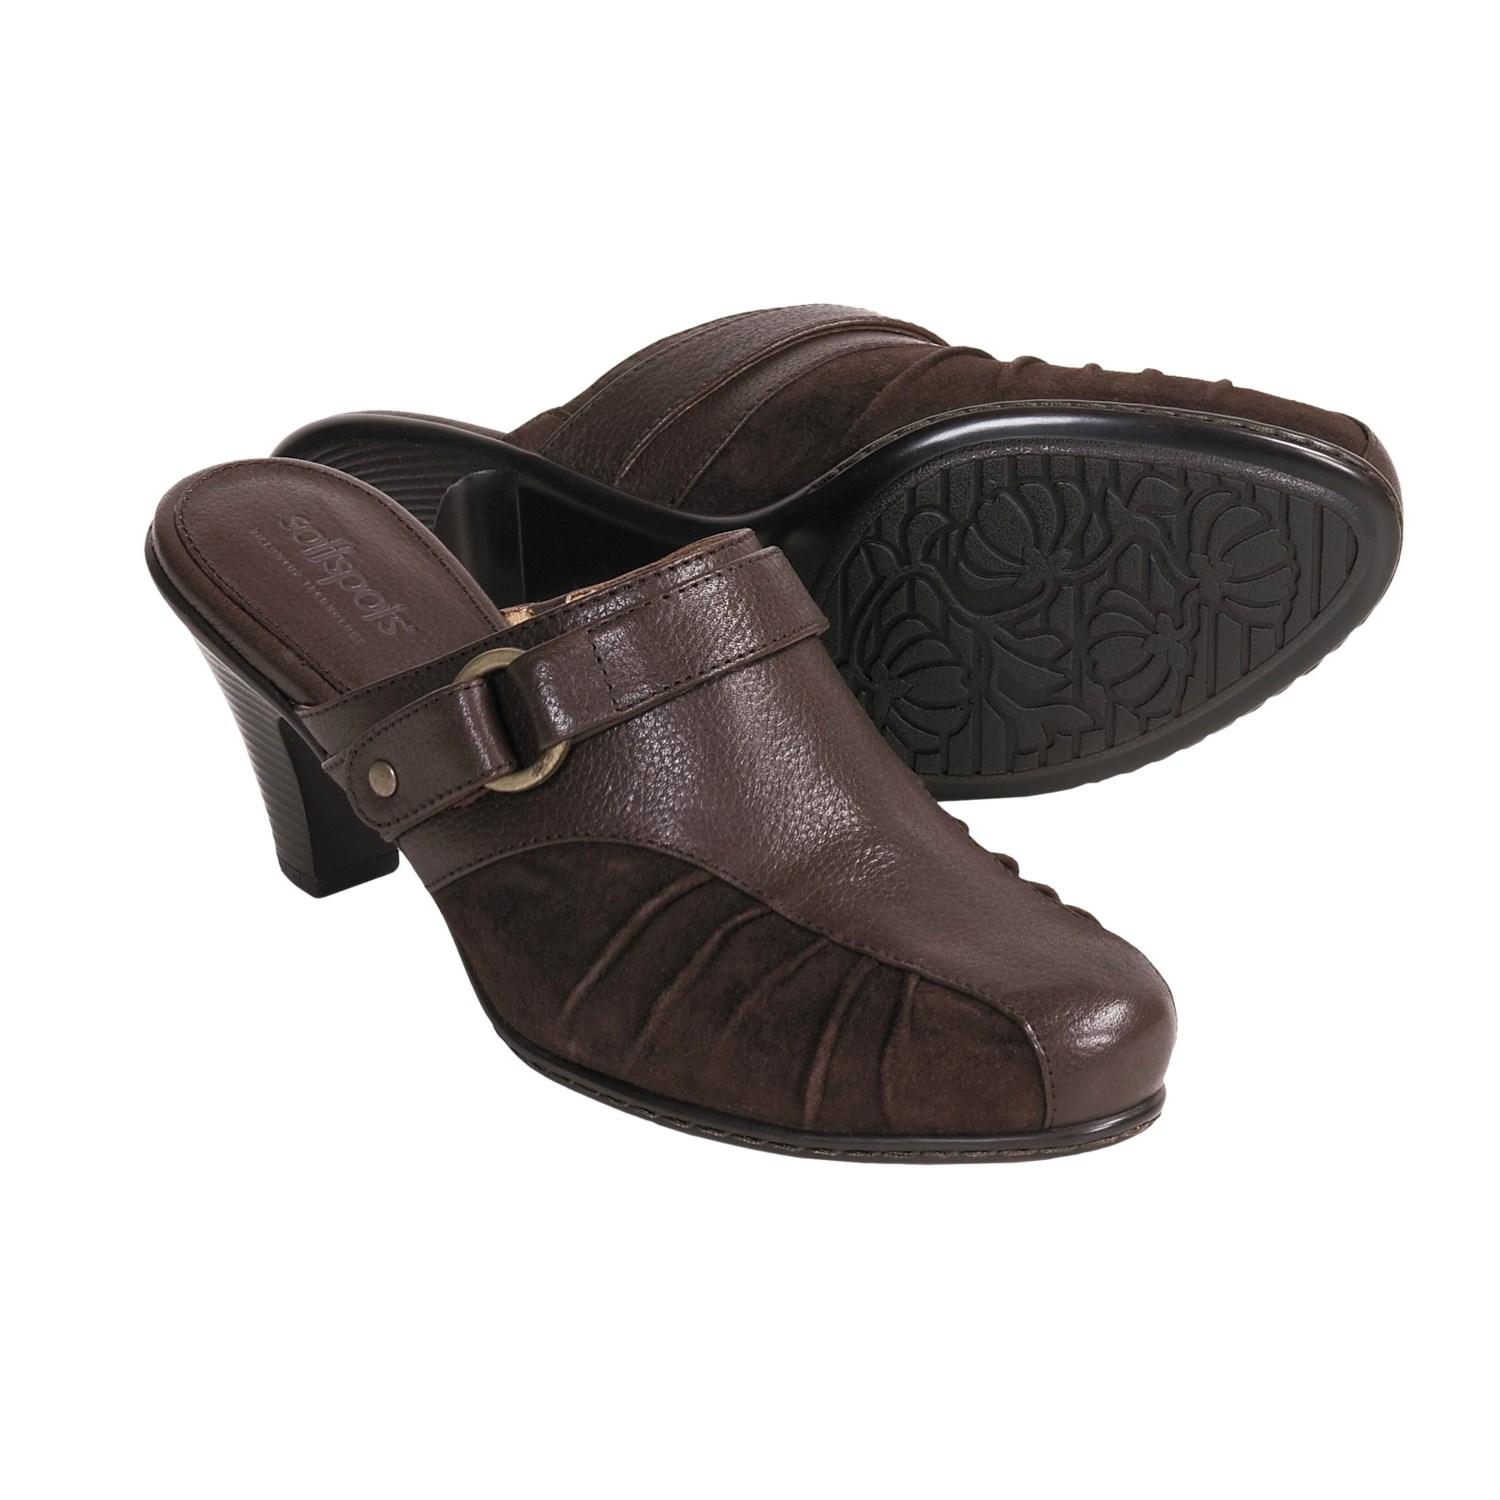 Softspots Sadie Clogs (For Women) 3448R - Save 35%